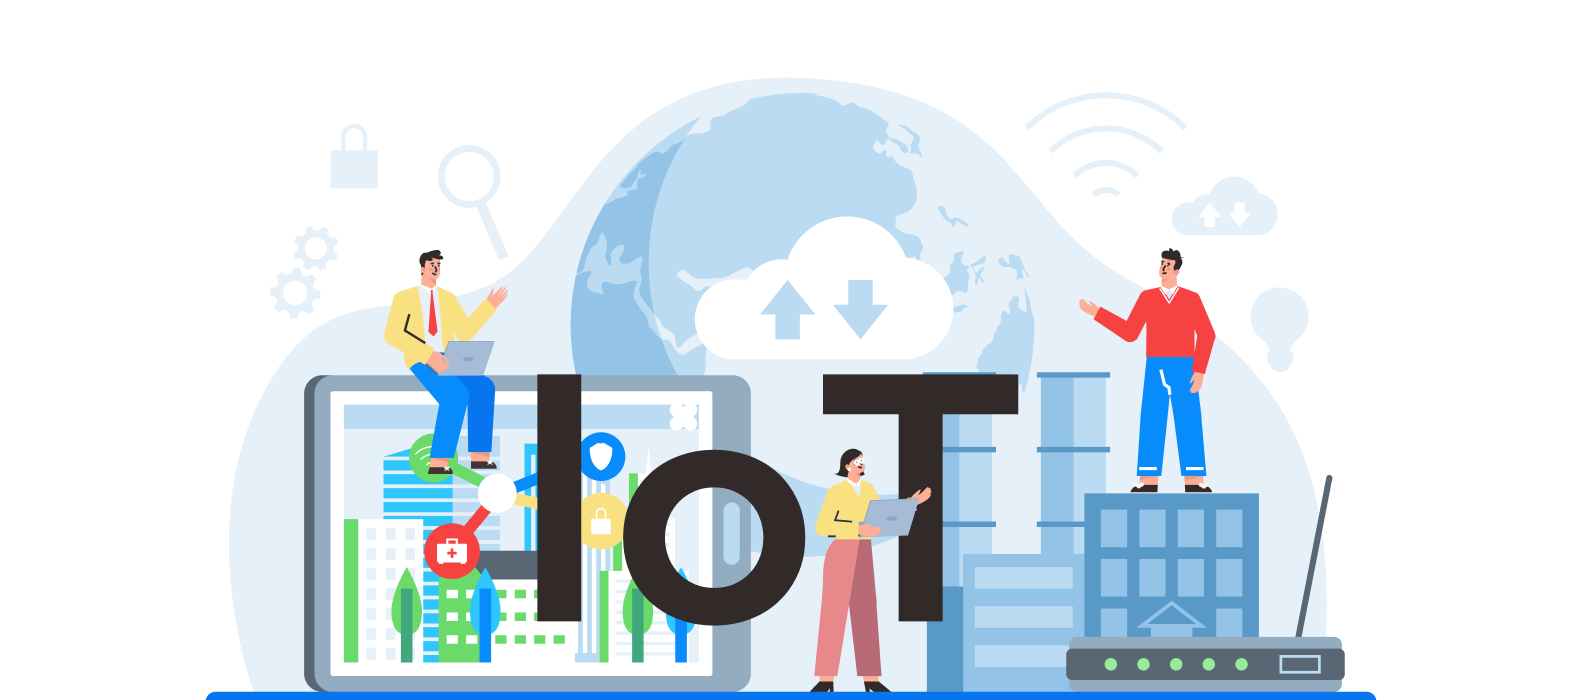 What are IoT-Based Applications? 30 Best IoT Applications Examples in 2023 